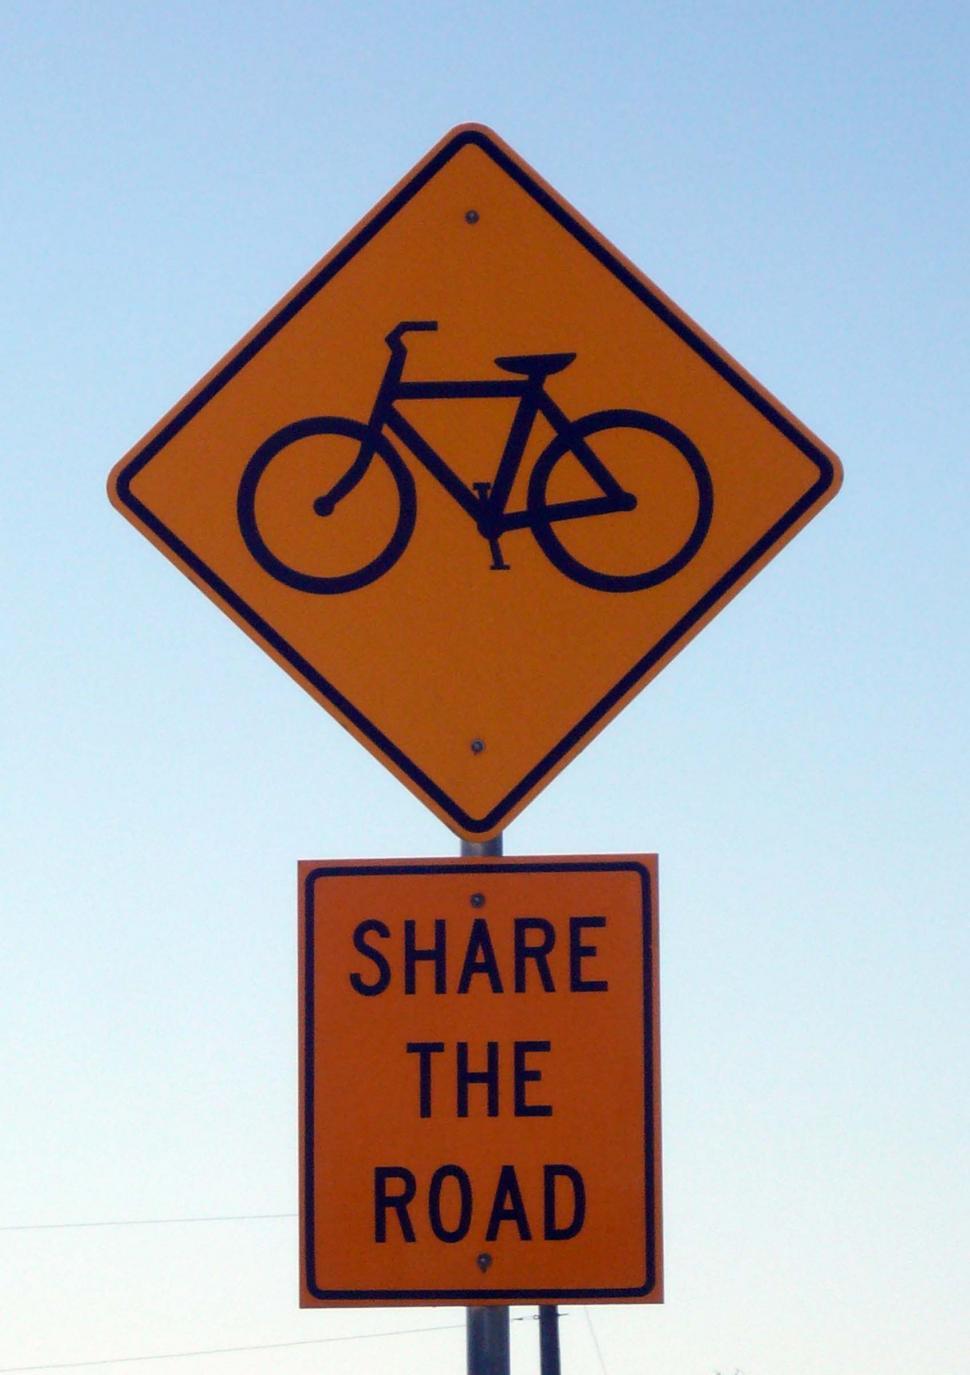 Free Image of Street Sign Saying Share the Road 